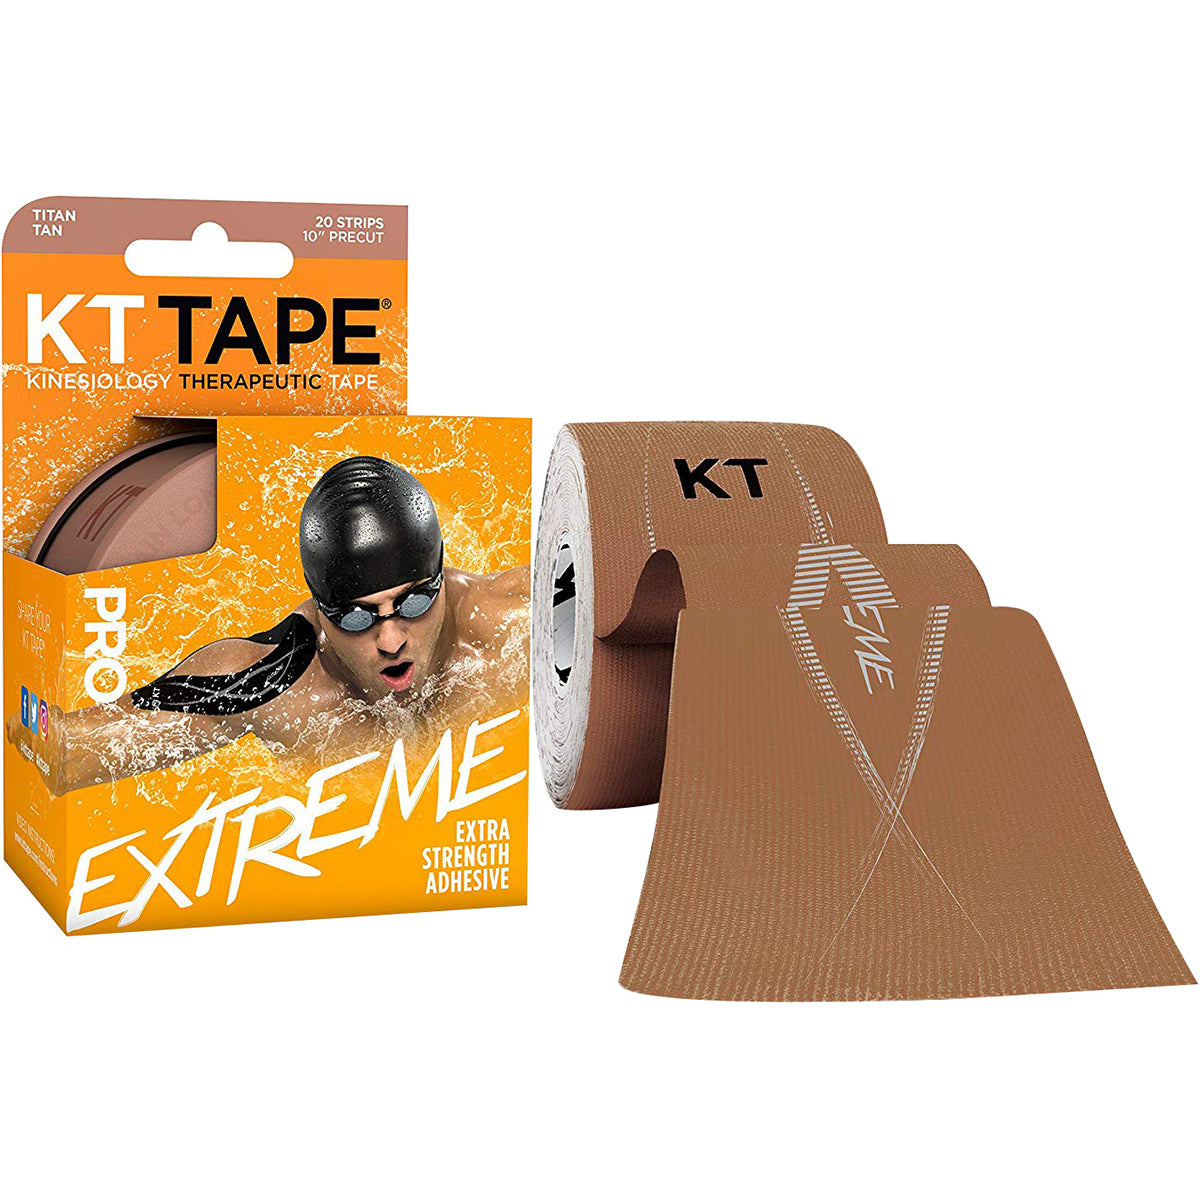 KT Tape Pro Extreme 10" Precut Kinesiology Therapeutic Sports Roll - 20 Strips KT Tape